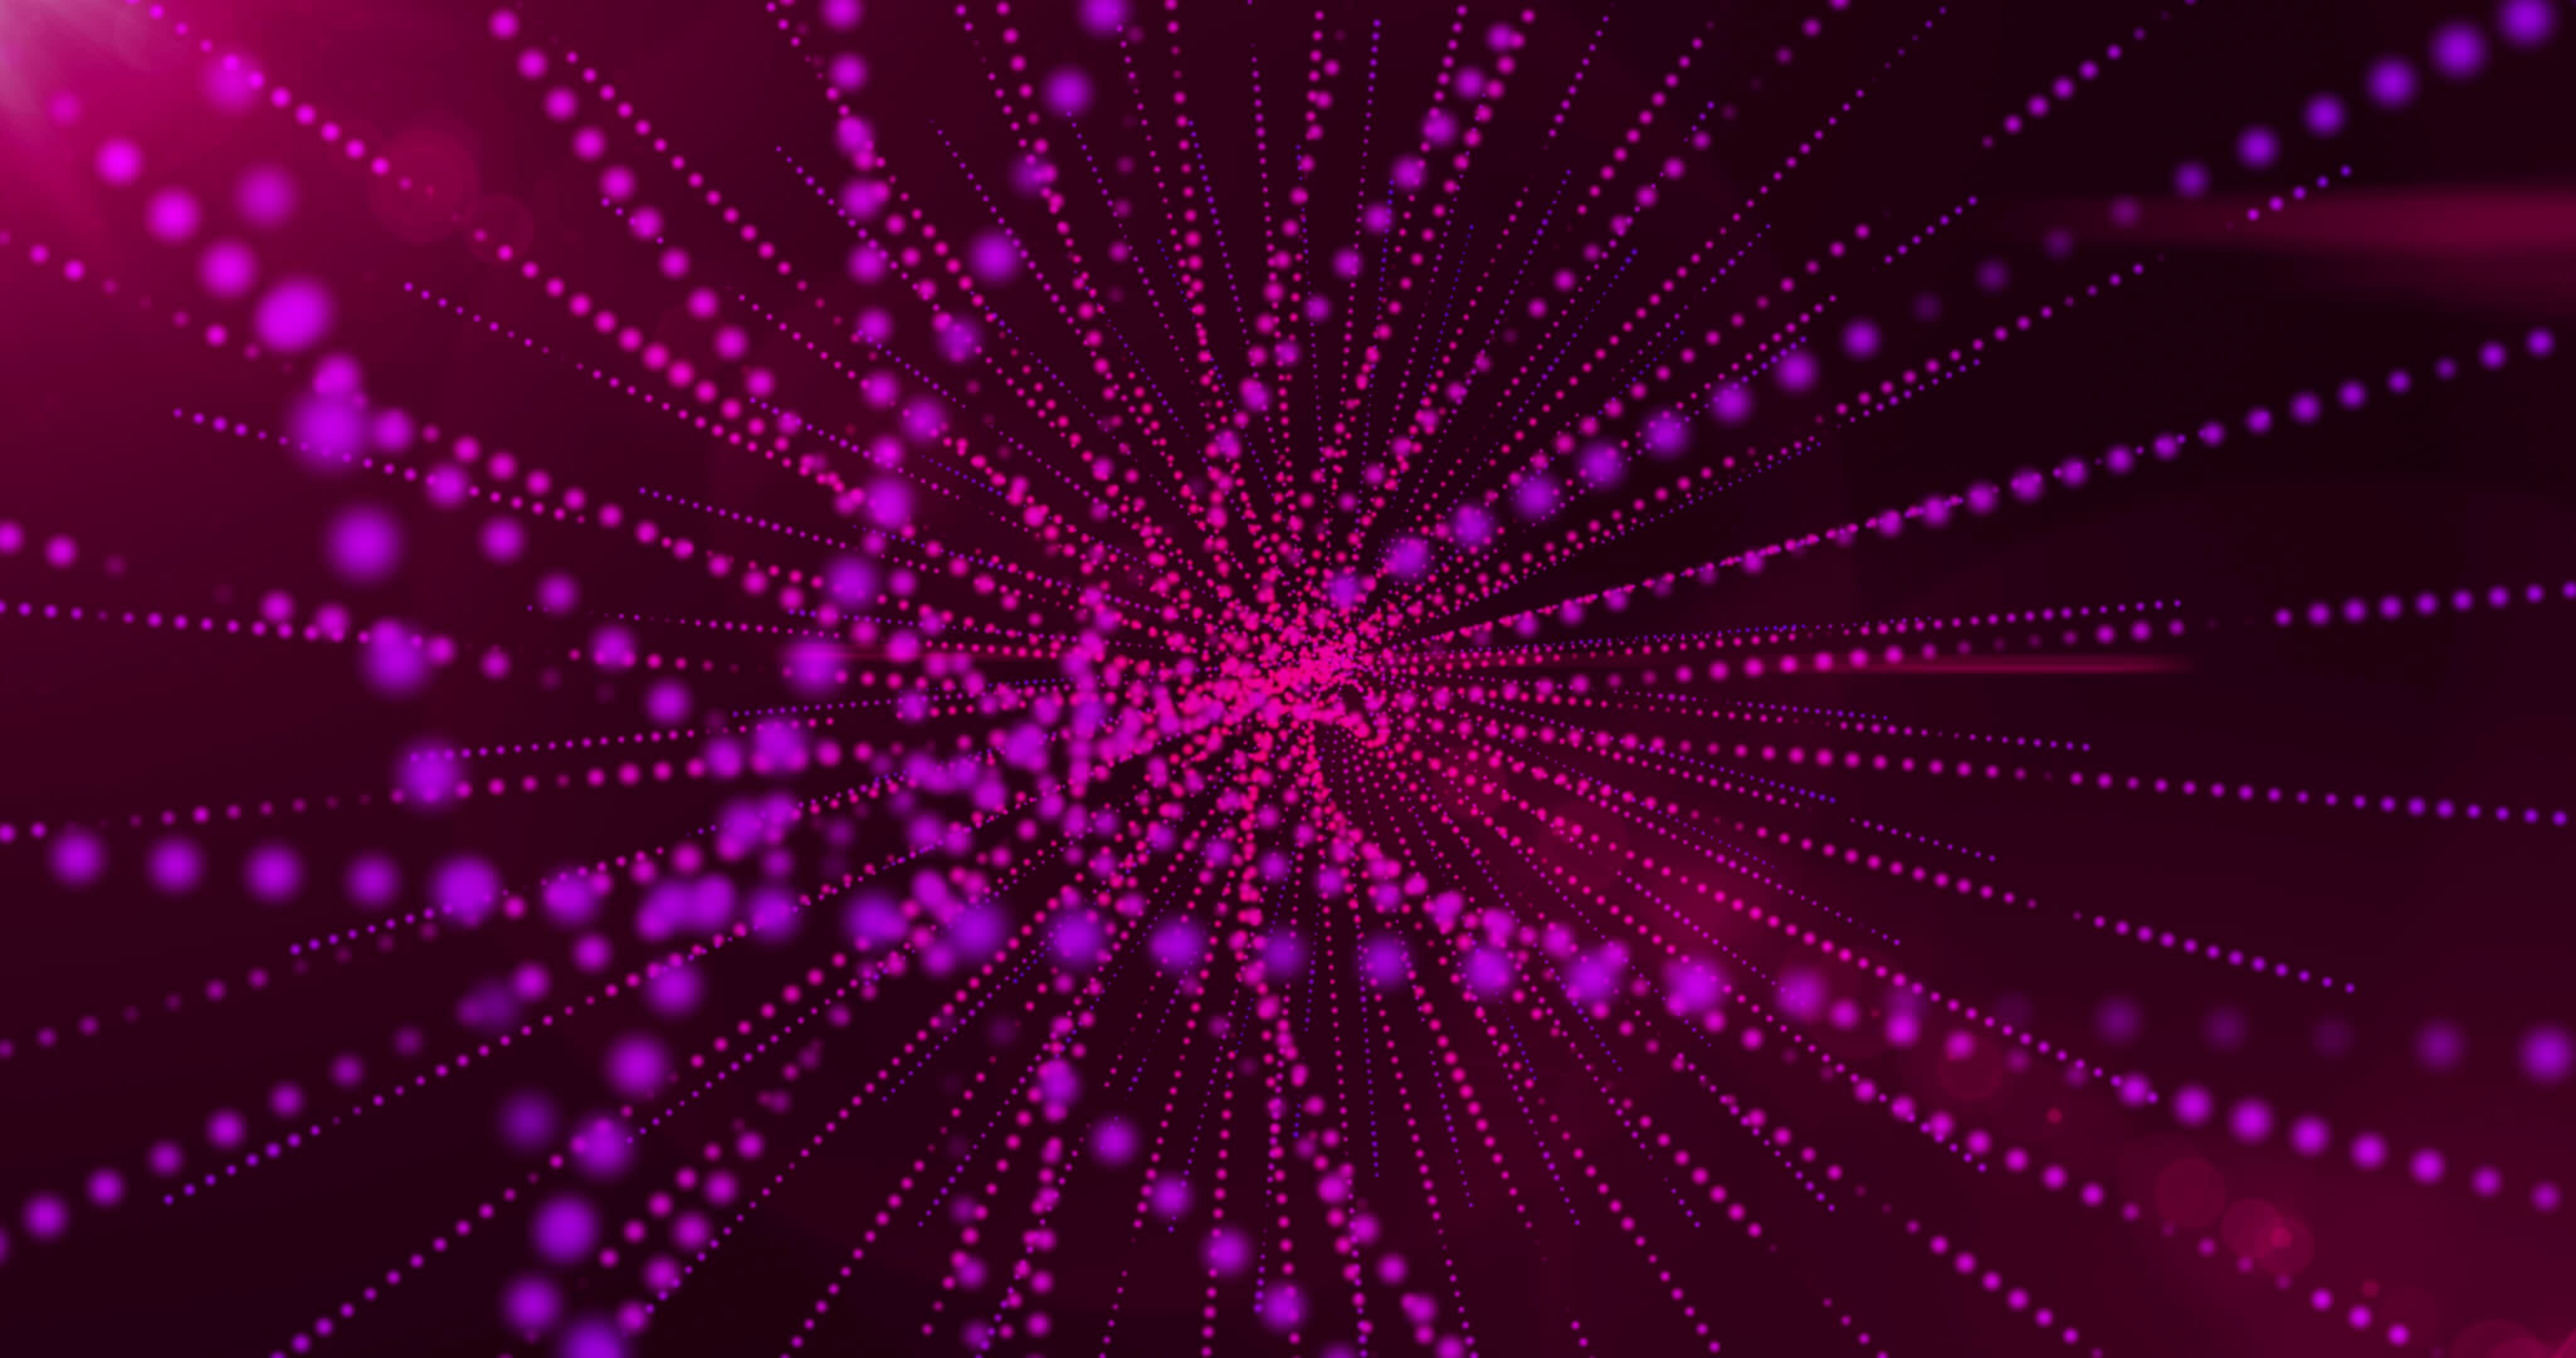 Abstract background of shimmering and sparkling glowing pink particles ...